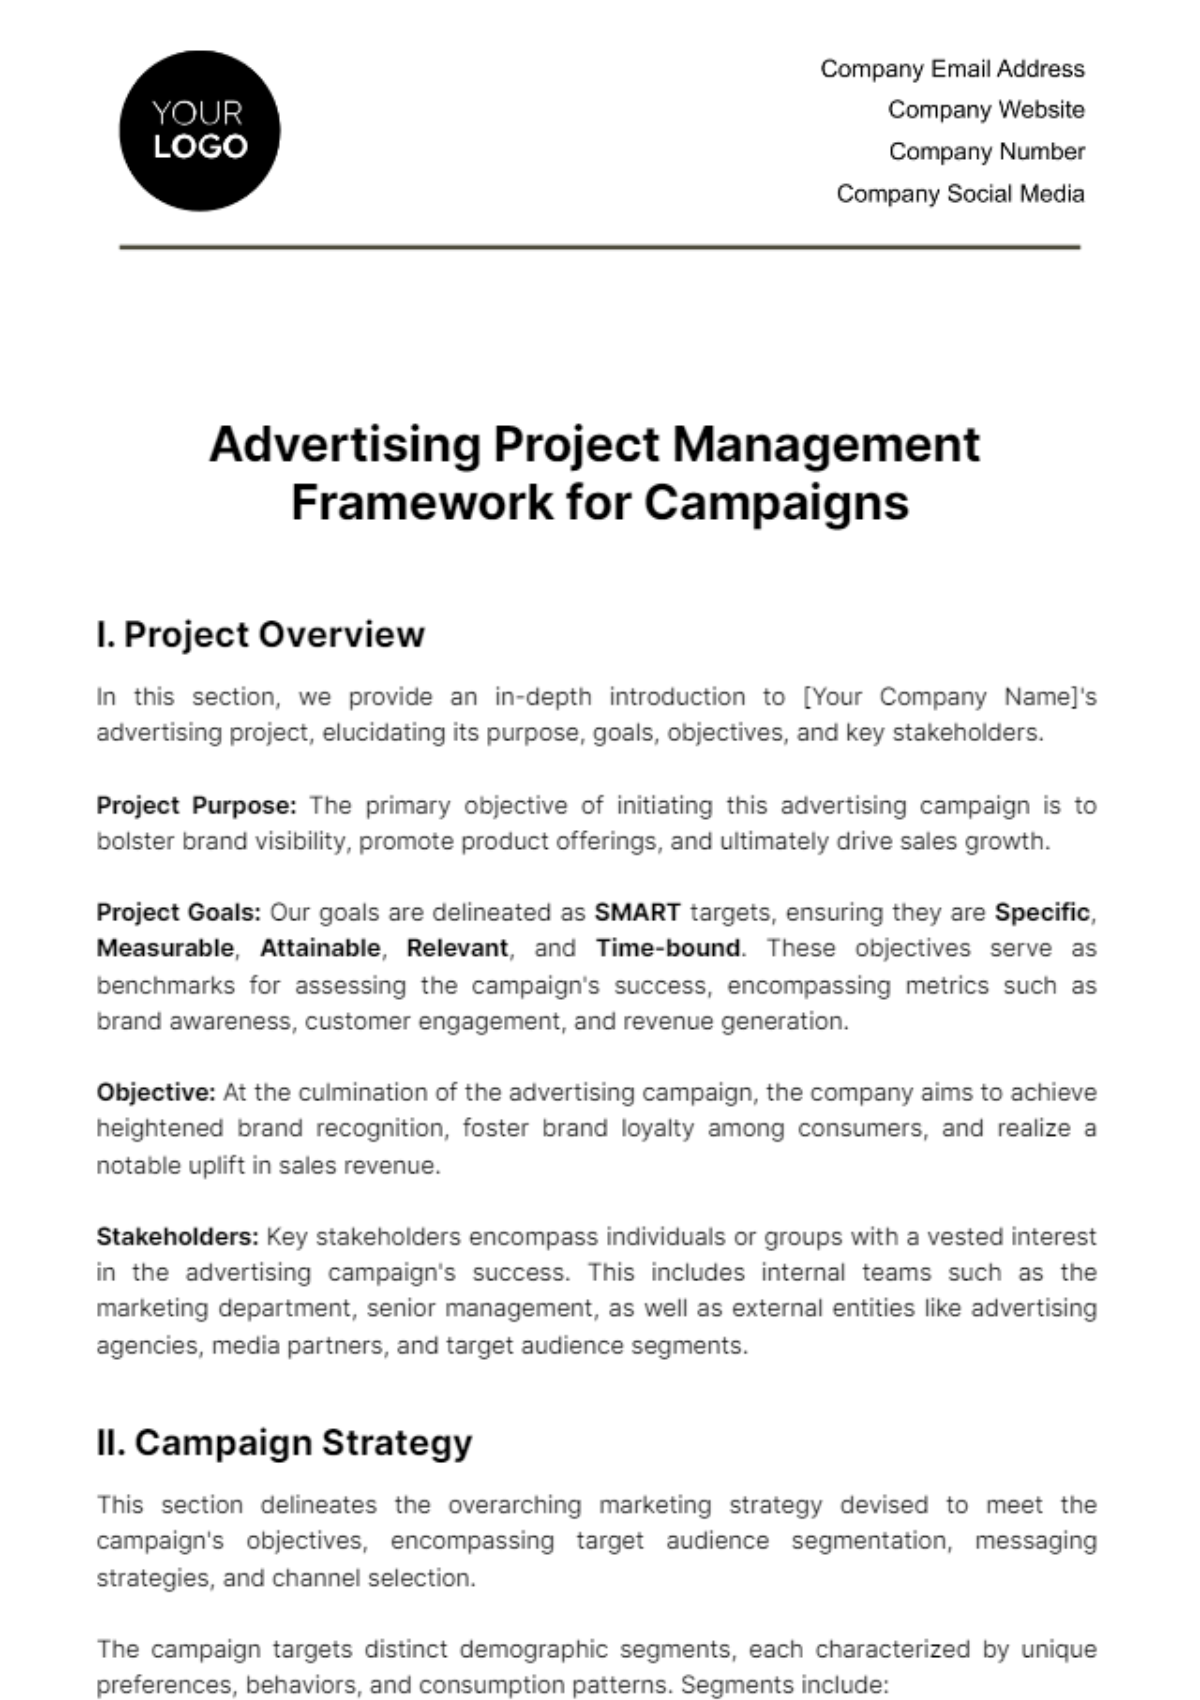 Advertising Project Management Framework for Campaigns Template